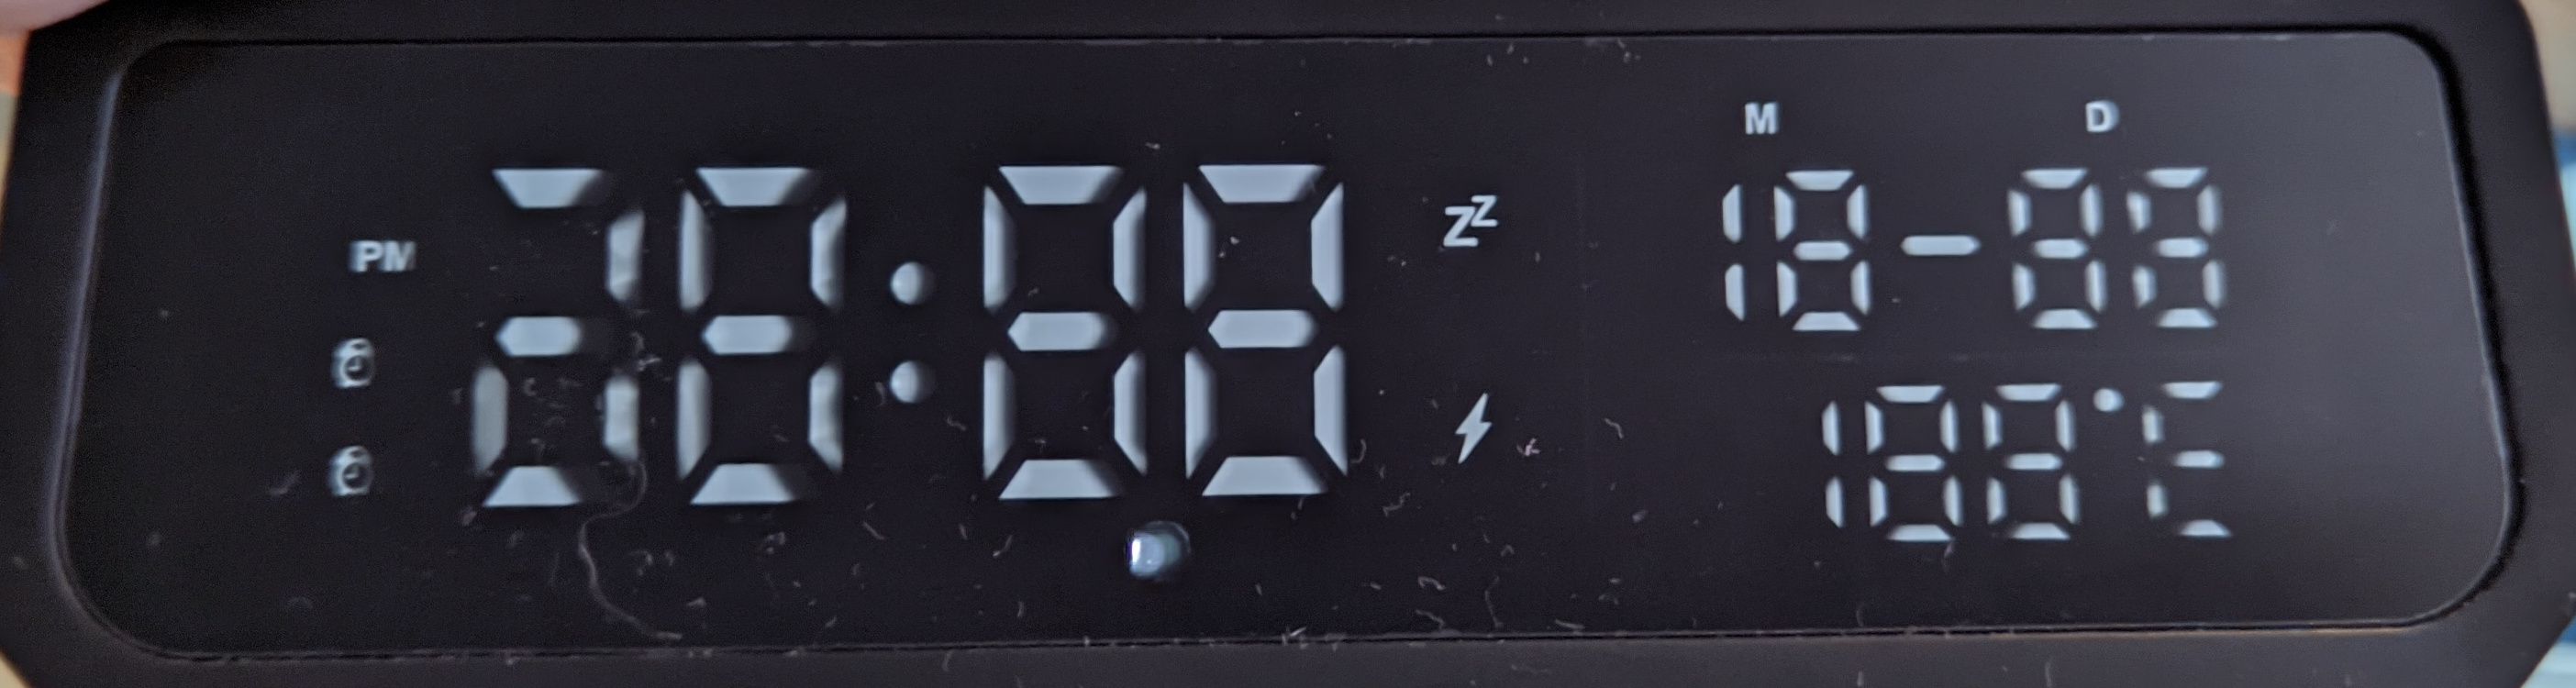 All display segments light up at the same time showing PM, alarm, snooze, etc. symbols